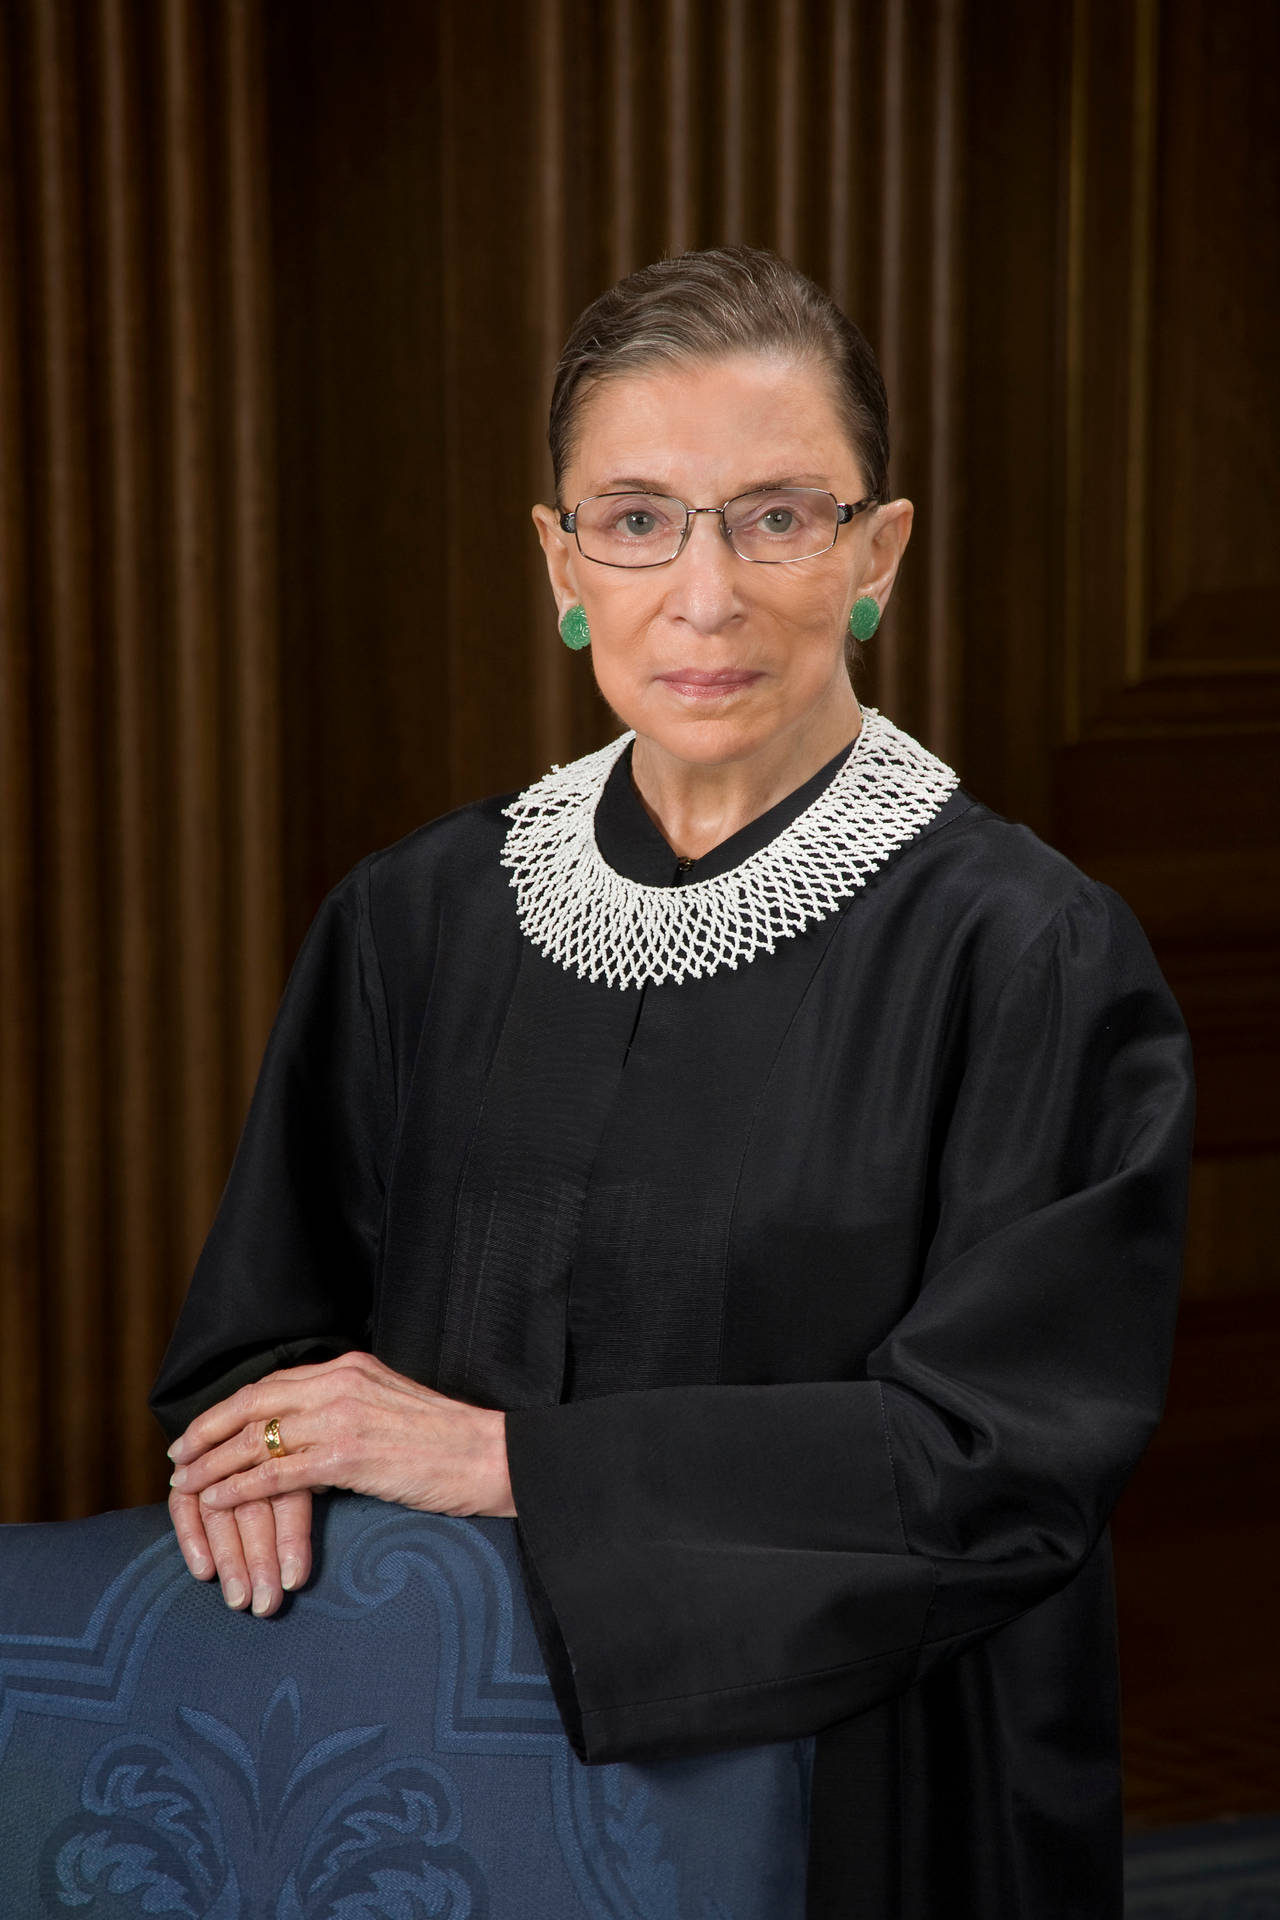 Ruth Bader Ginsburg Traditional Black Gown Background